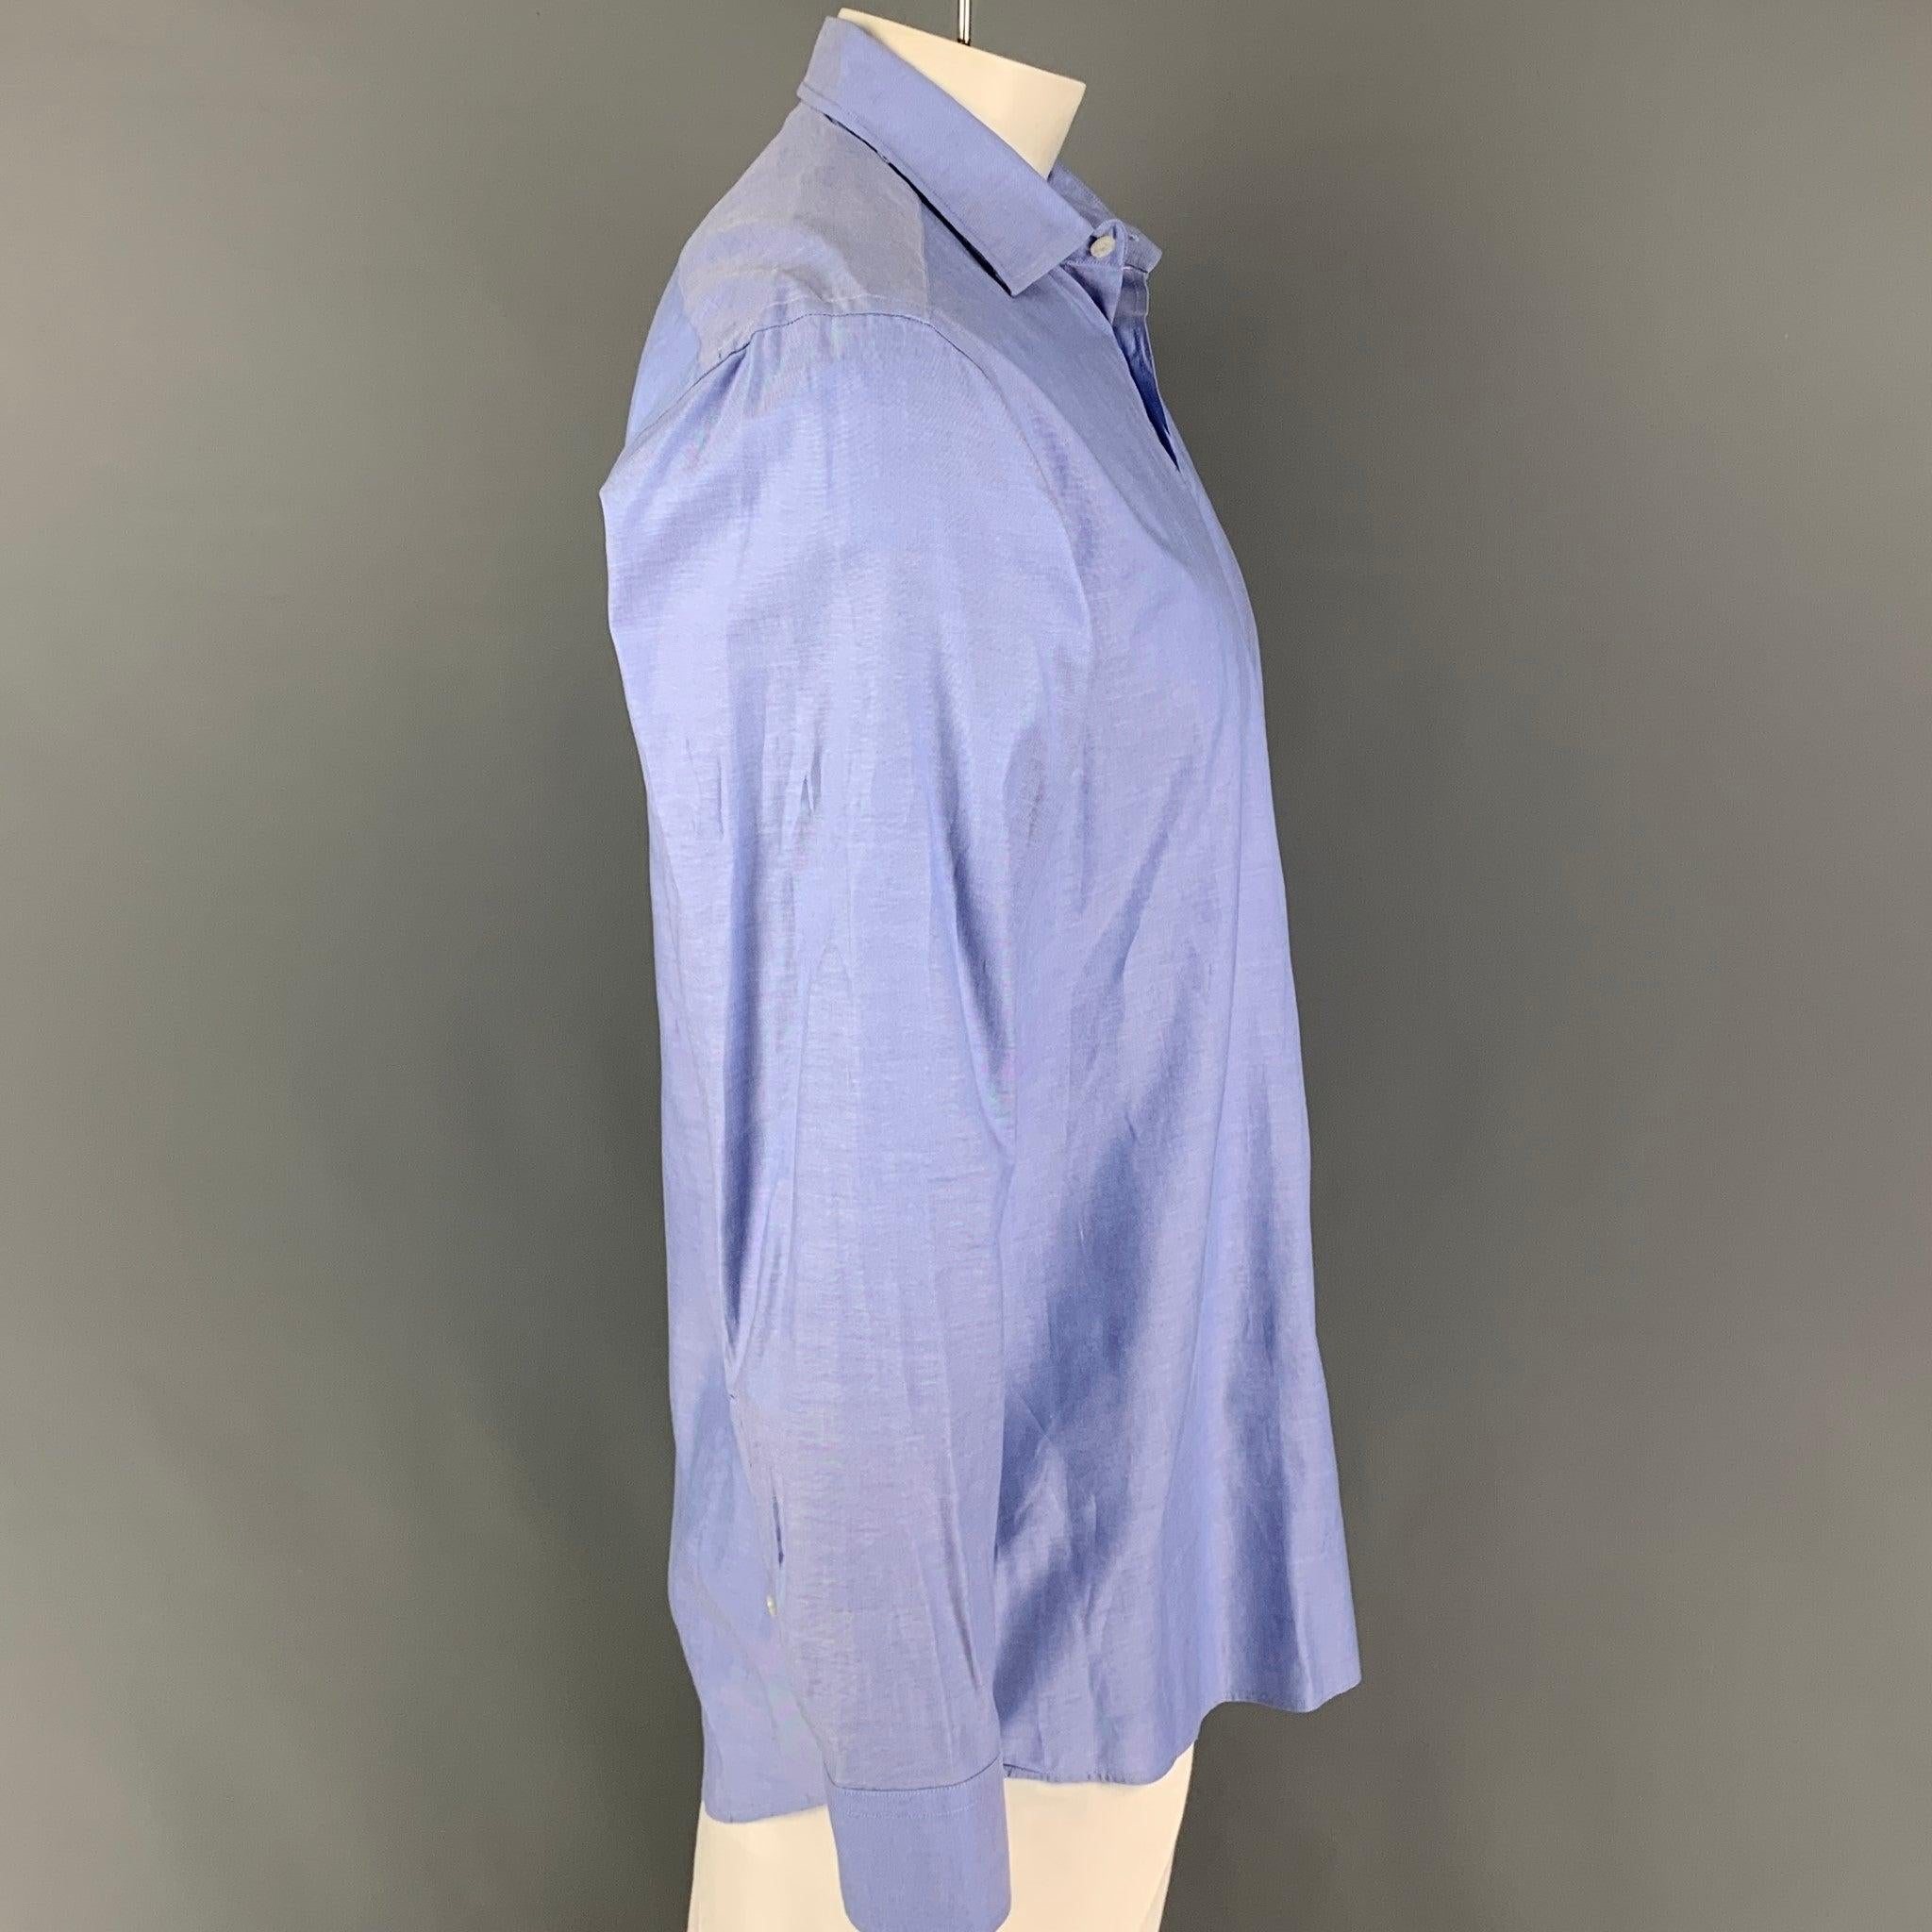 ETRO long sleeve shirt comes in a blue cotton featuring a spread collar and a button up closure. Made in Italy.
Very Good
Pre-Owned Condition. 

Marked:   42 

Measurements: 
 
Shoulder: 19 inches  Chest: 44 inches  Sleeve: 26 inches  Length: 32.5